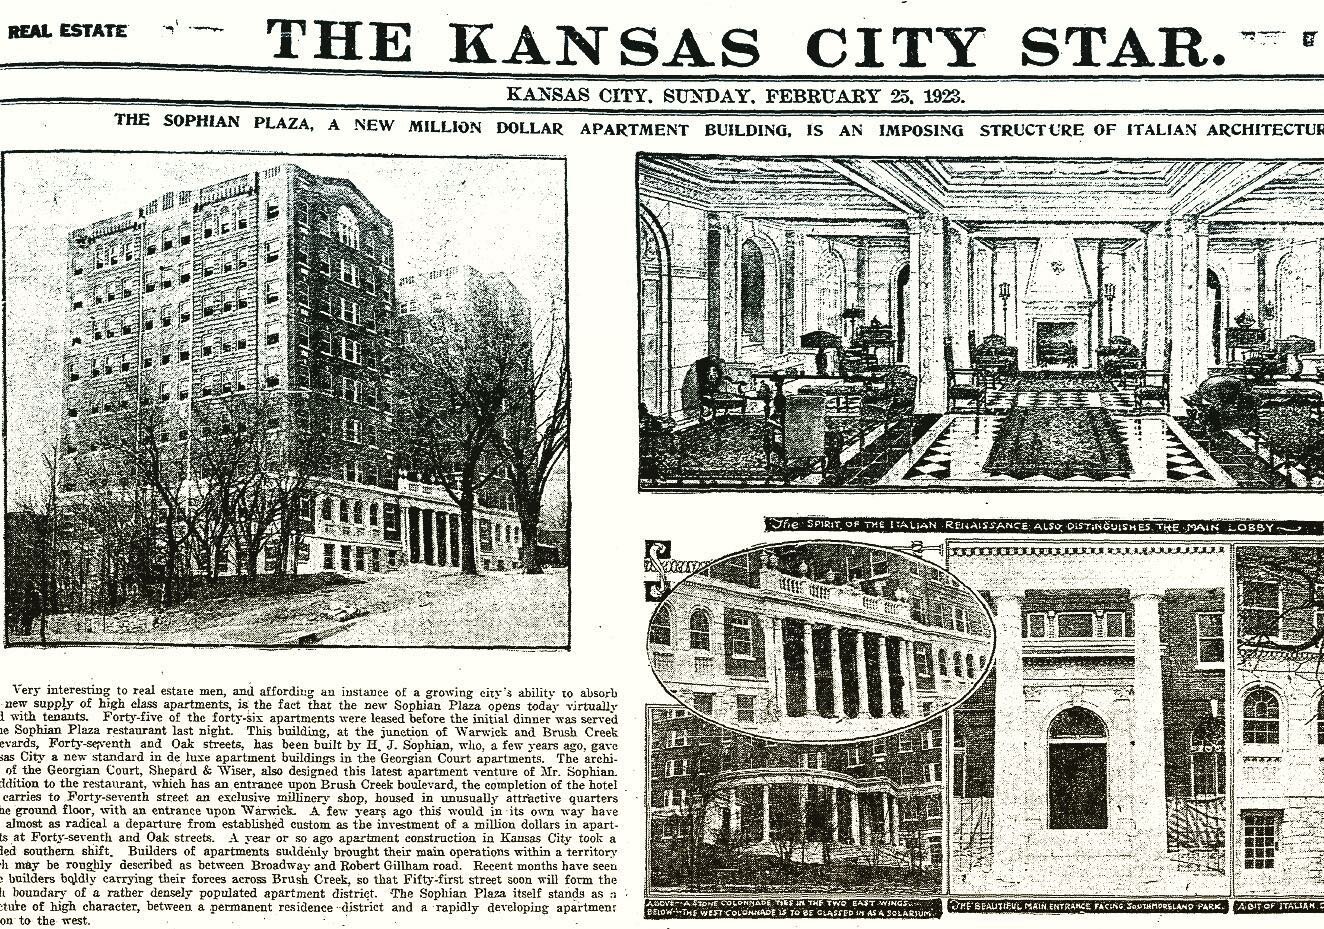 The Sophian is officially 100 years old! The Kansas City Star celebrated the Sophian opening Feb 25, 1923, built by Harry Sophian, who brought a new standard in deluxe apartment buildings to Kansas City.